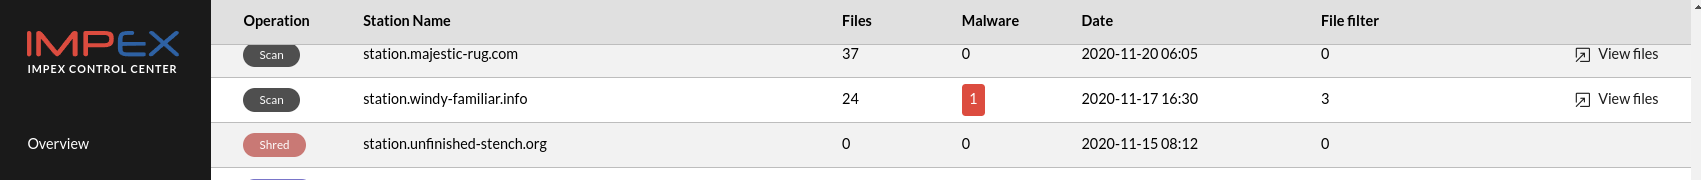 File filter match in a scan operation listing